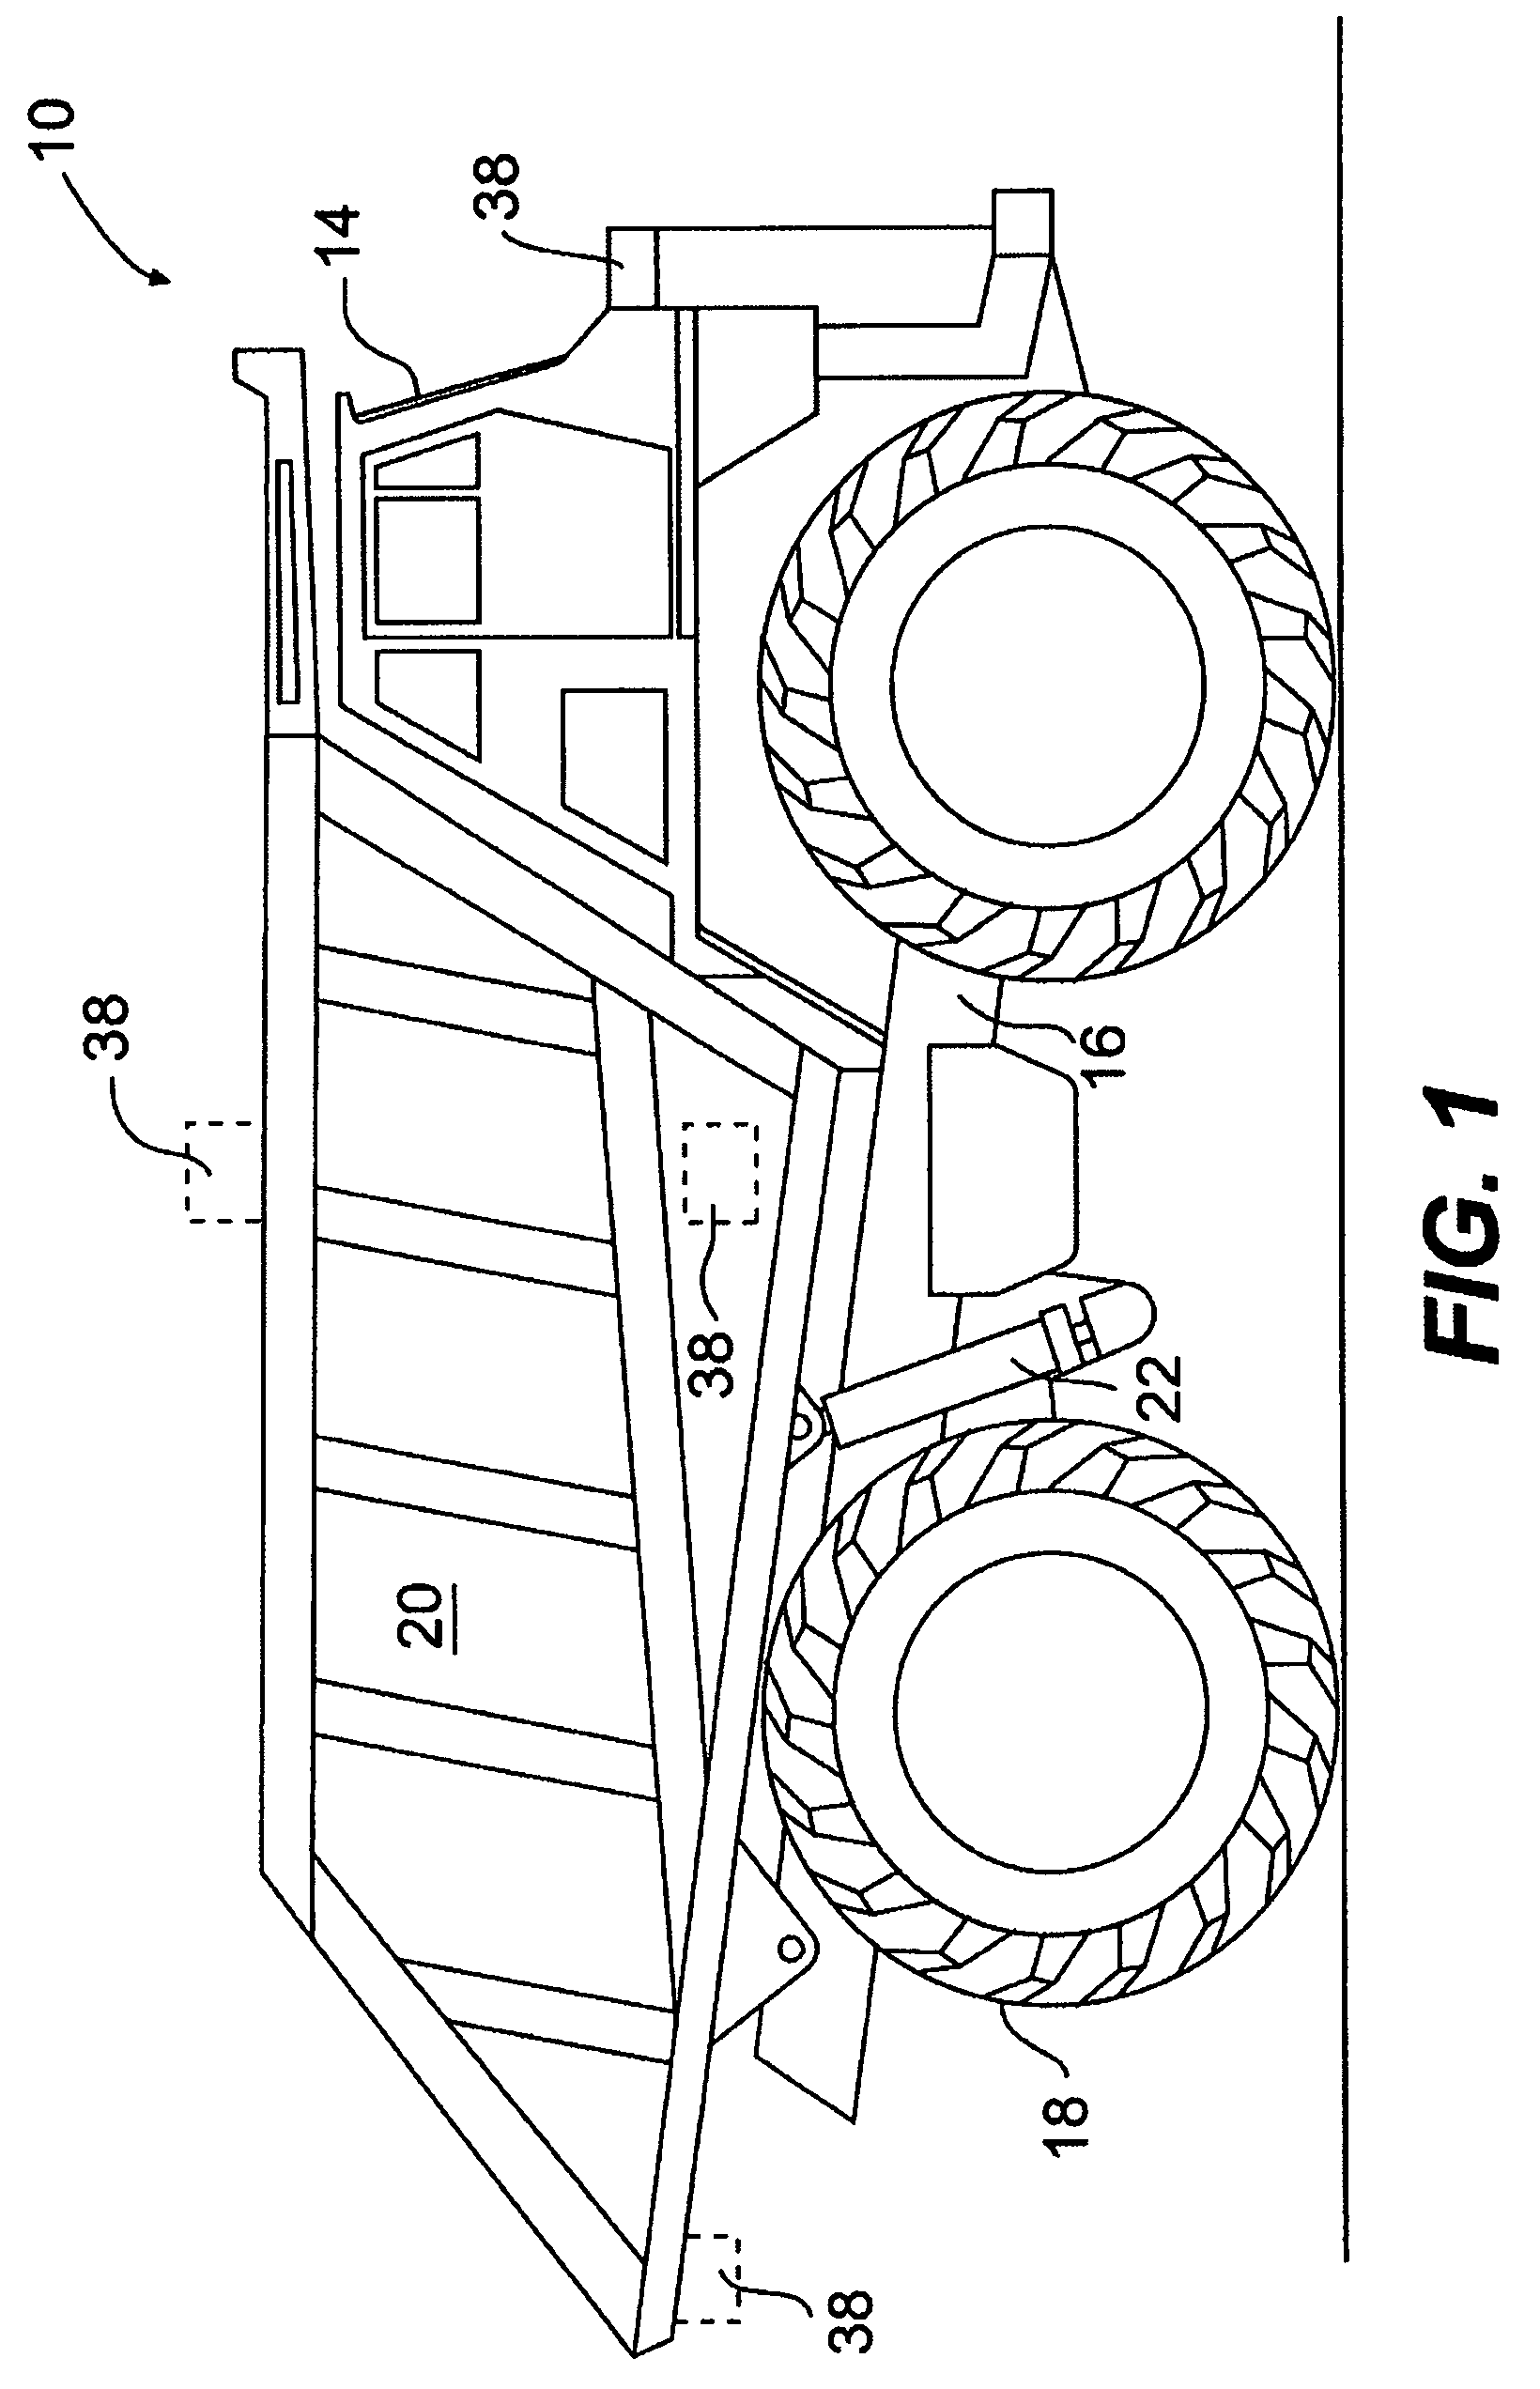 Machine control system and method